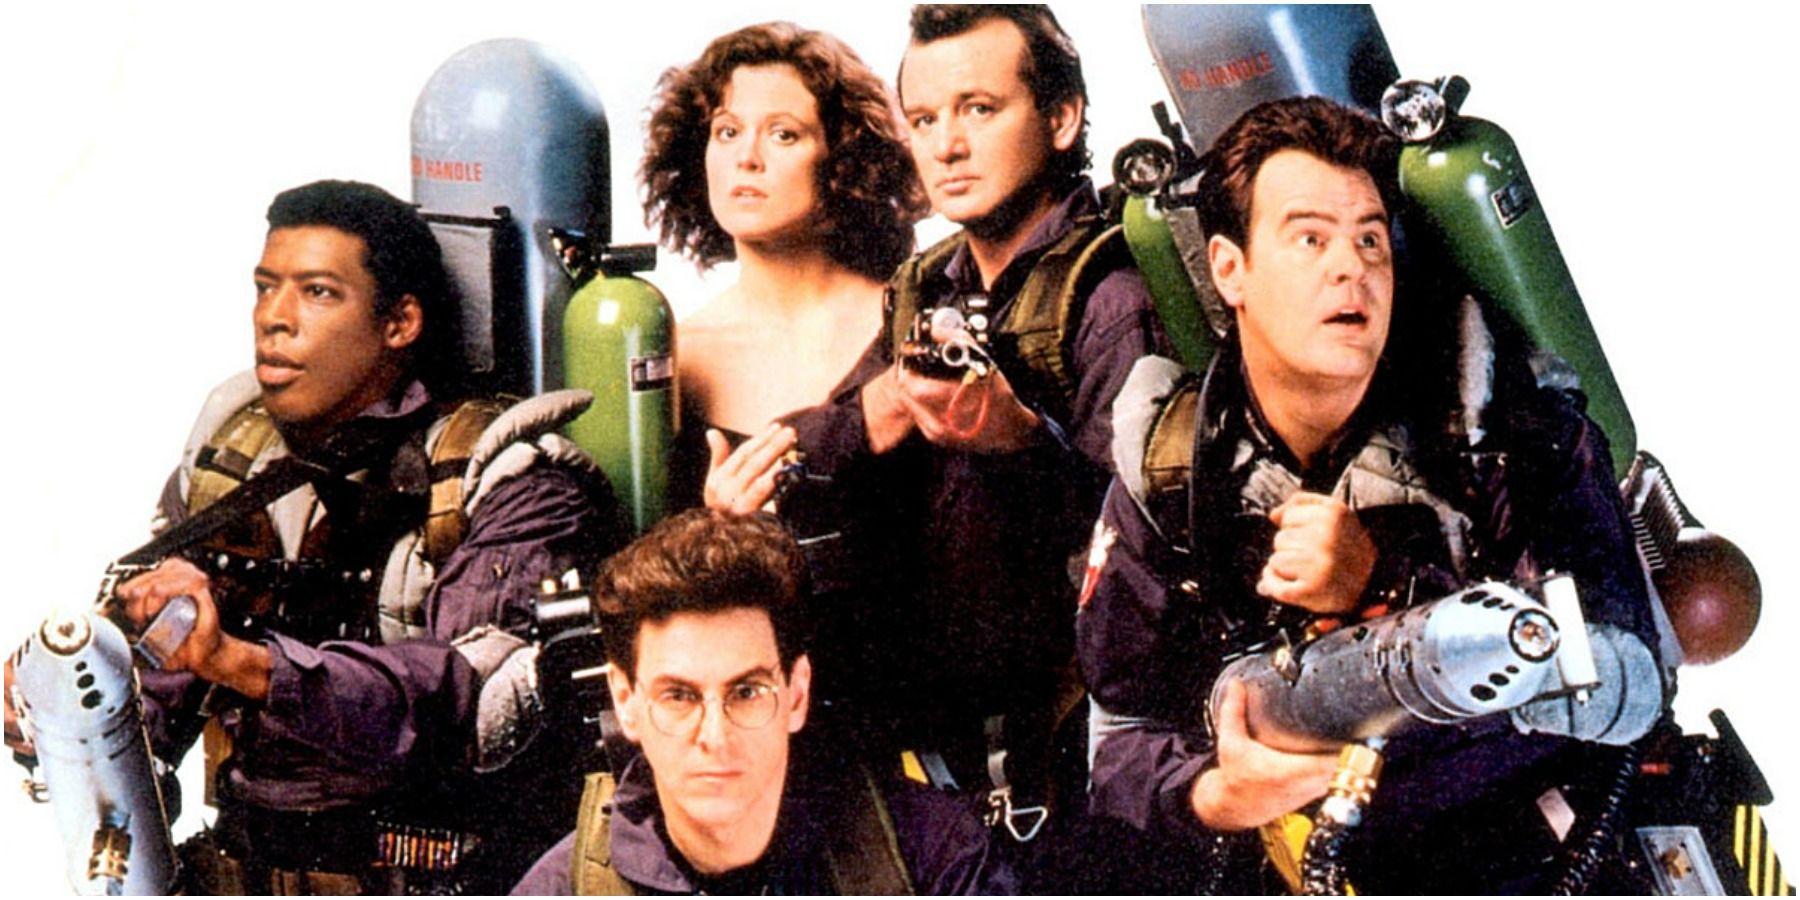 Winston, Dana, Peter, Ray, and Egon in Ghostbusters II with slime packs 